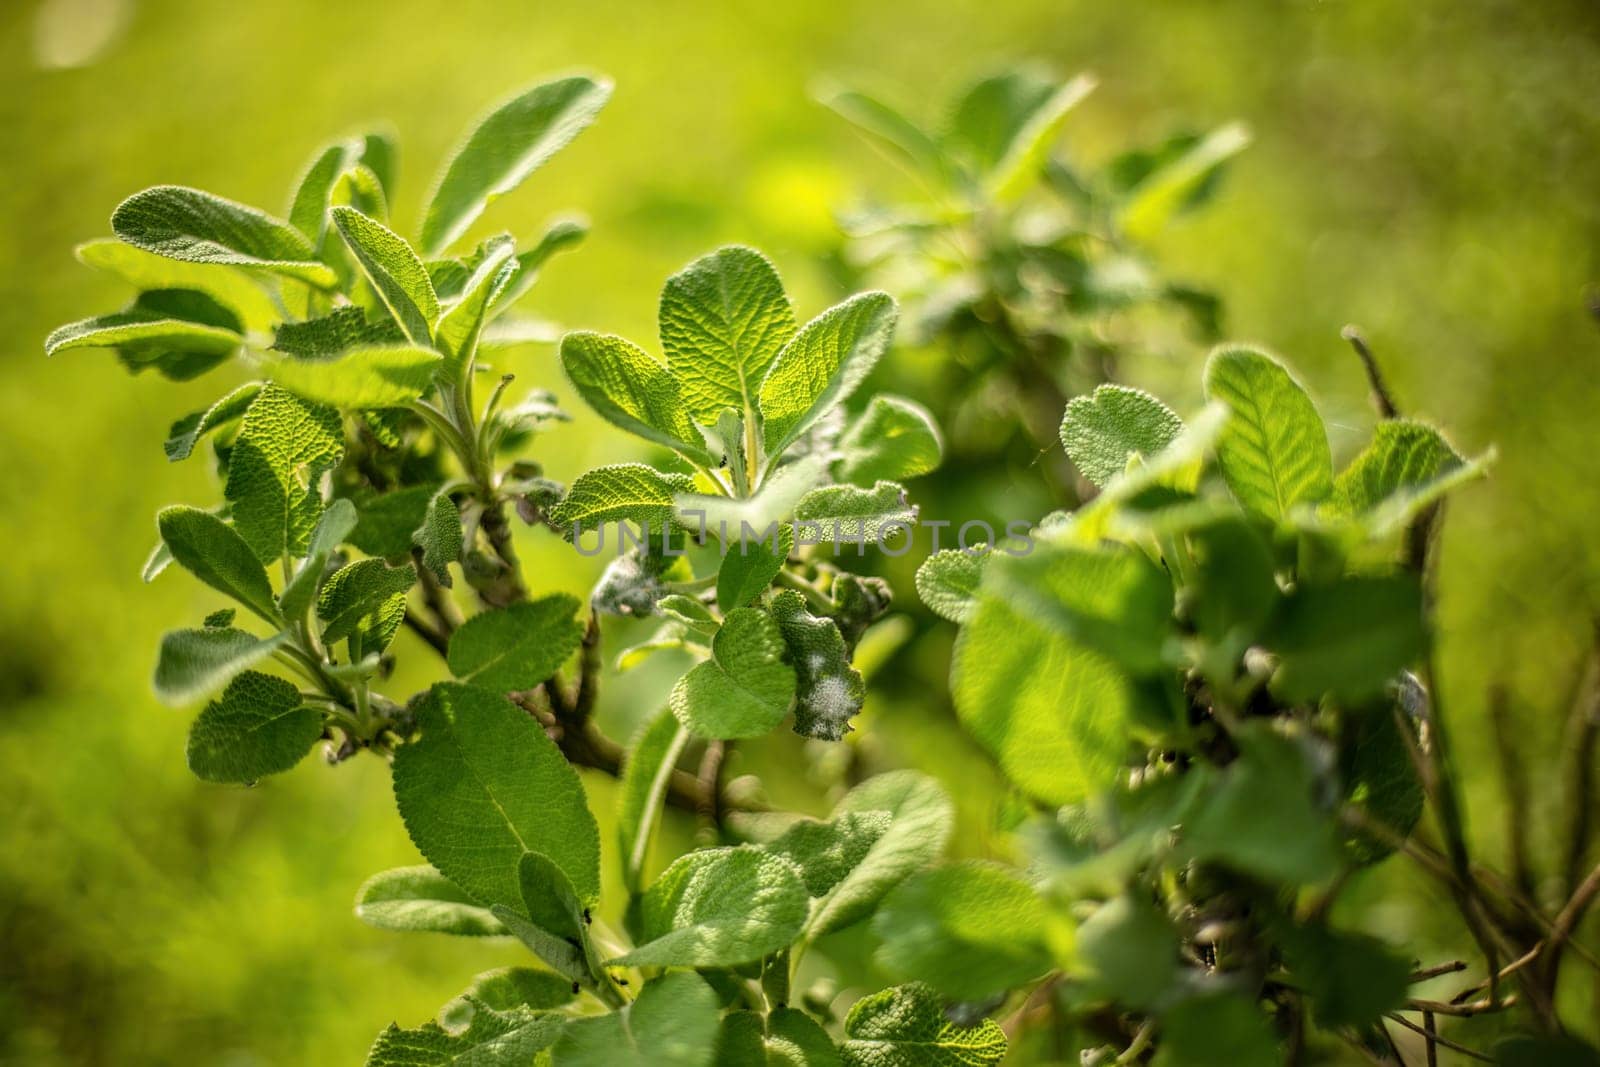 Close-up view of sage leaves, emphasizing the textured details and herbal freshness.